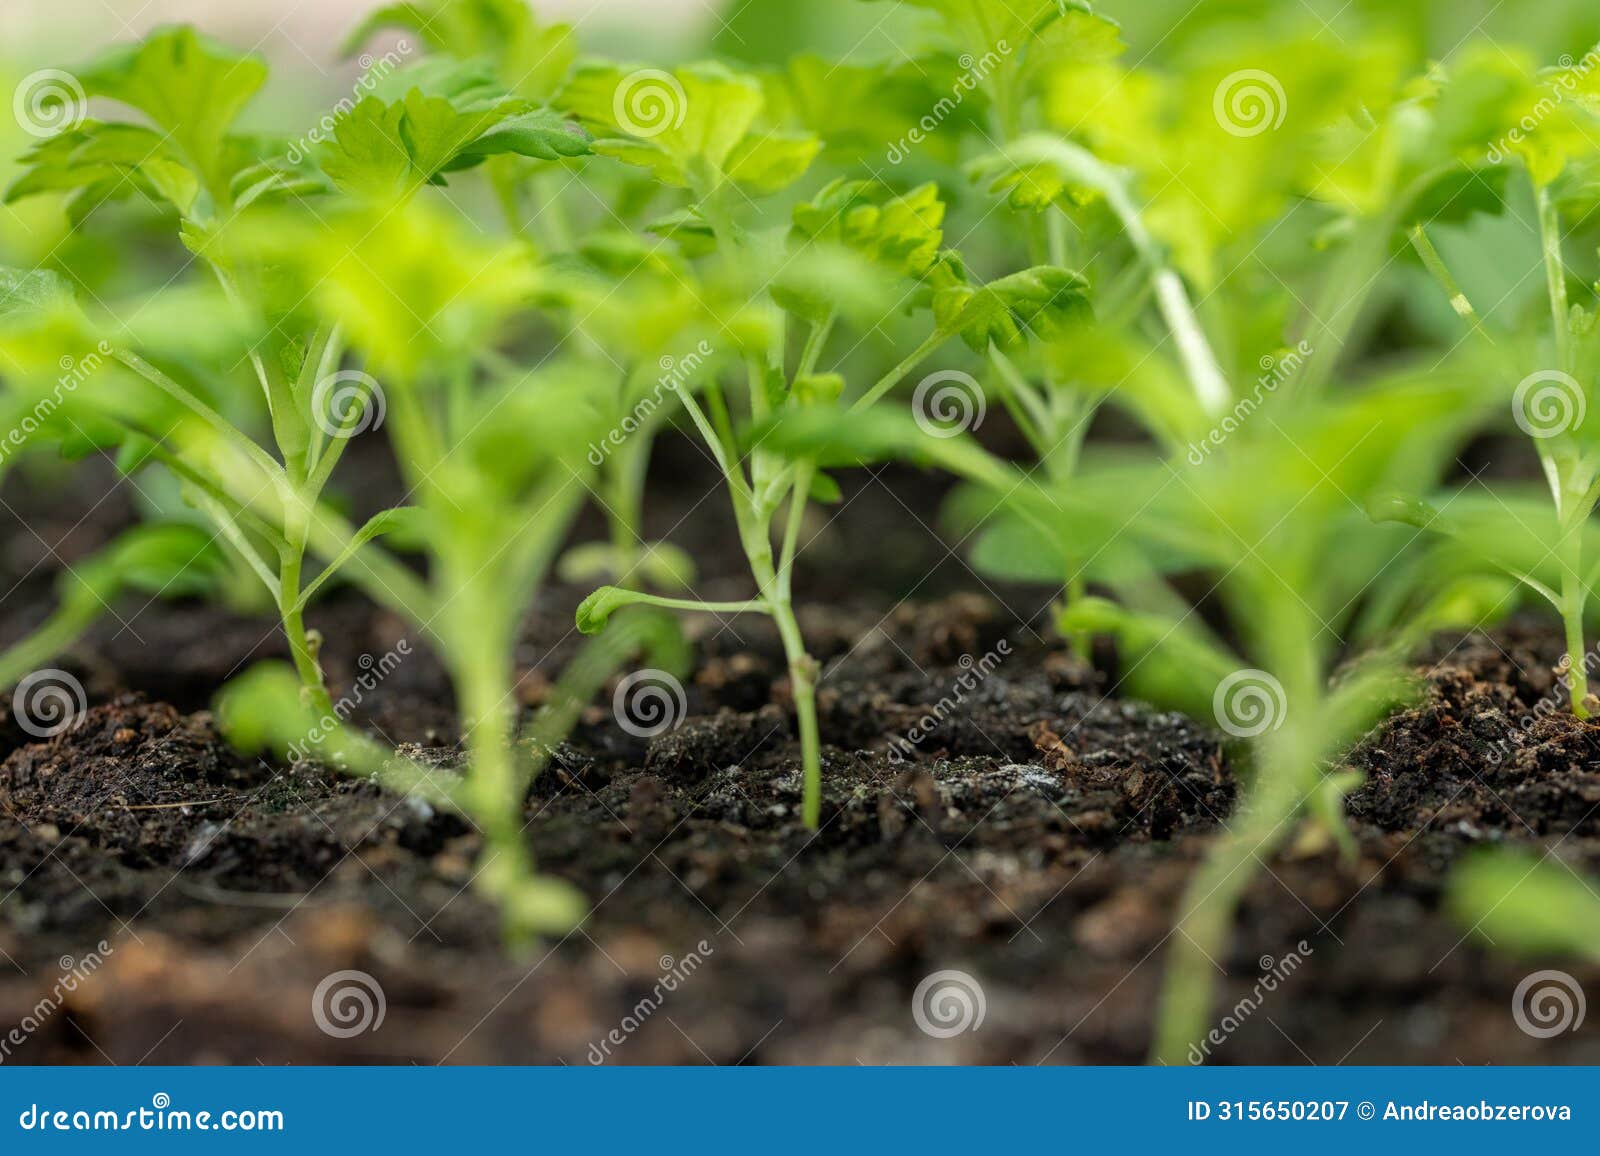 feverfew seedlings in soil blocks. soil blocking is a seed starting technique that relies on planting seeds in cubes of soil.